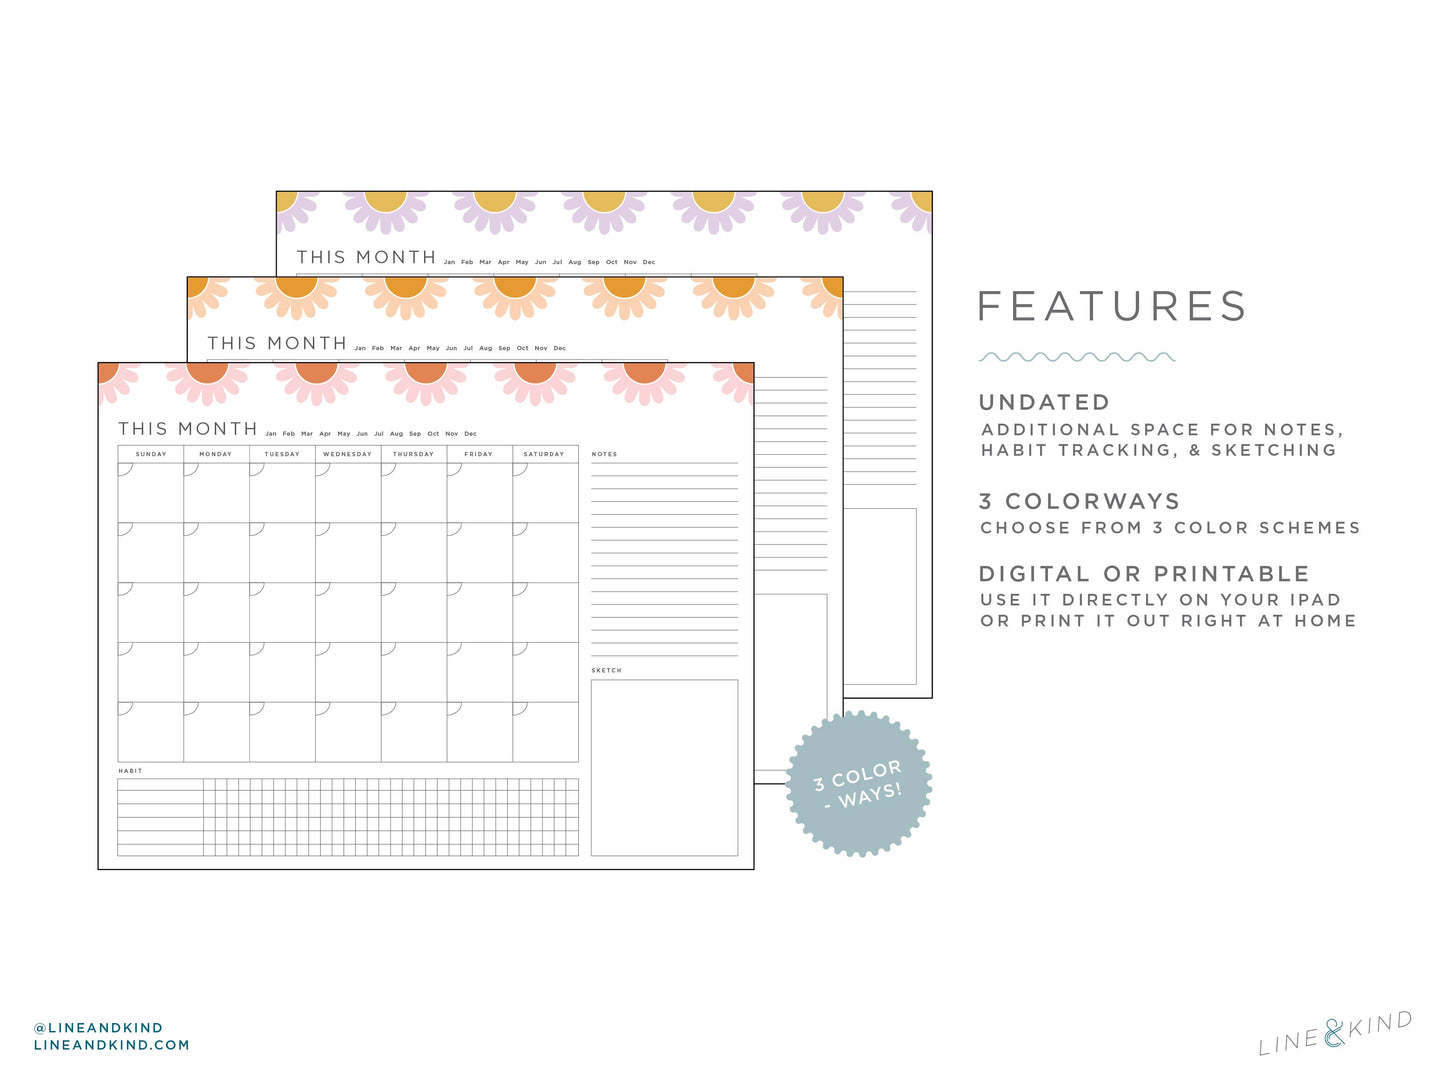 Daisy Monthly Planner